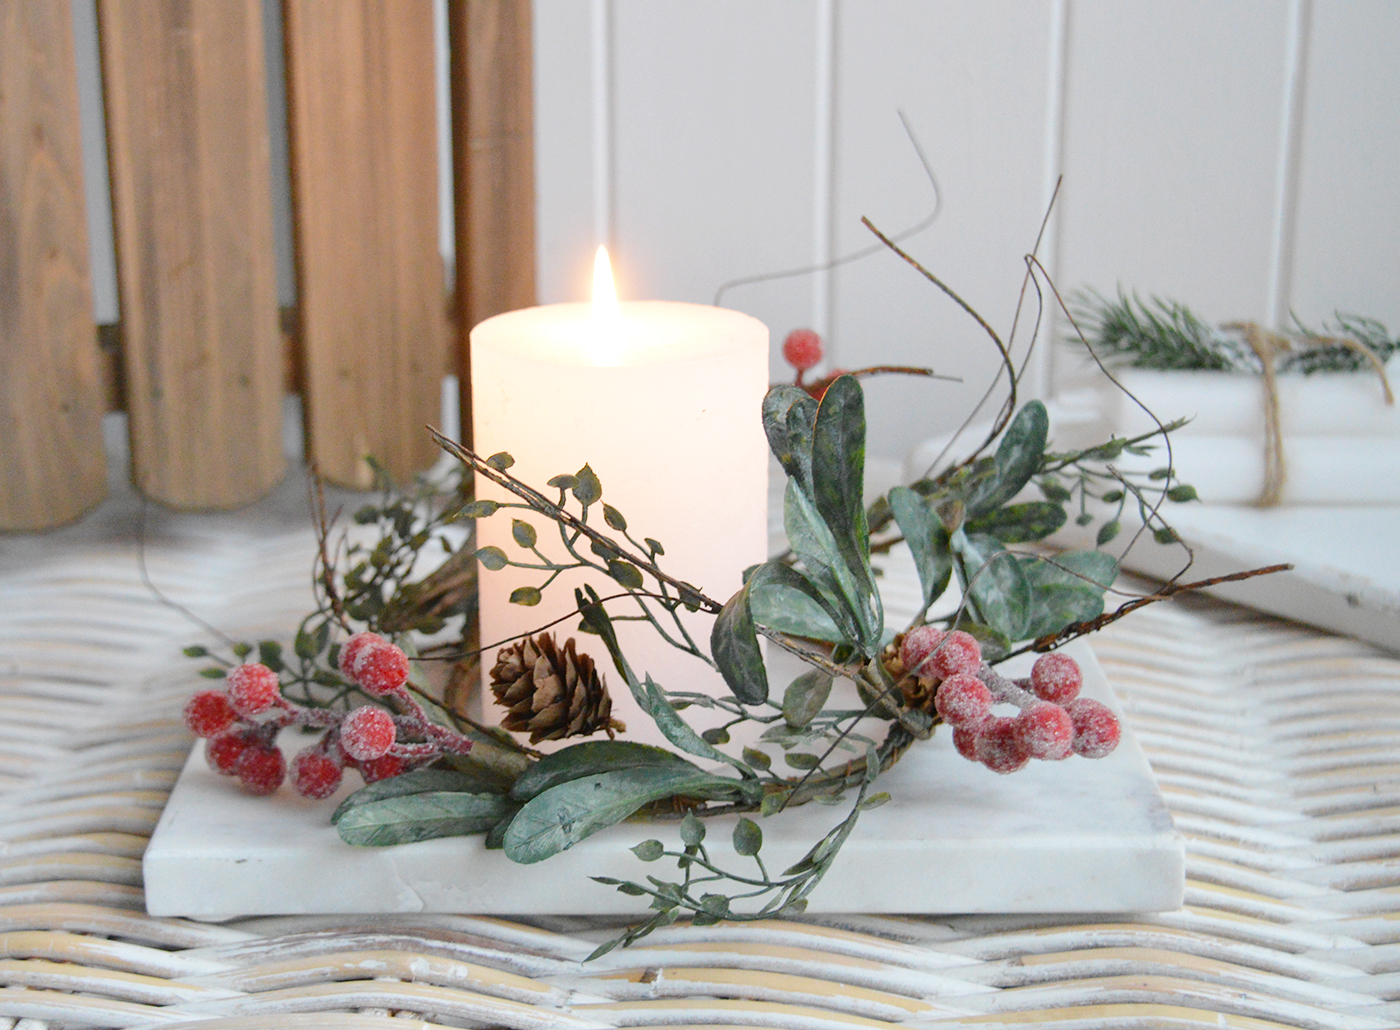 Create a beautiful centerpiece with this gorgeous winter candle ring with gently frosted leaves, little pinecones and contrasting red berries - Luxury Christmas table decoration from The White Lighhtouse New England Stlye homes and interiorsCreate a beautiful centerpiece with this gorgeous winter candle ring with gently frosted leaves, little pinecones and contrasting red berries - Luxury Christmas table decoration from The White Lighhtouse New England Stlye homes and interiors